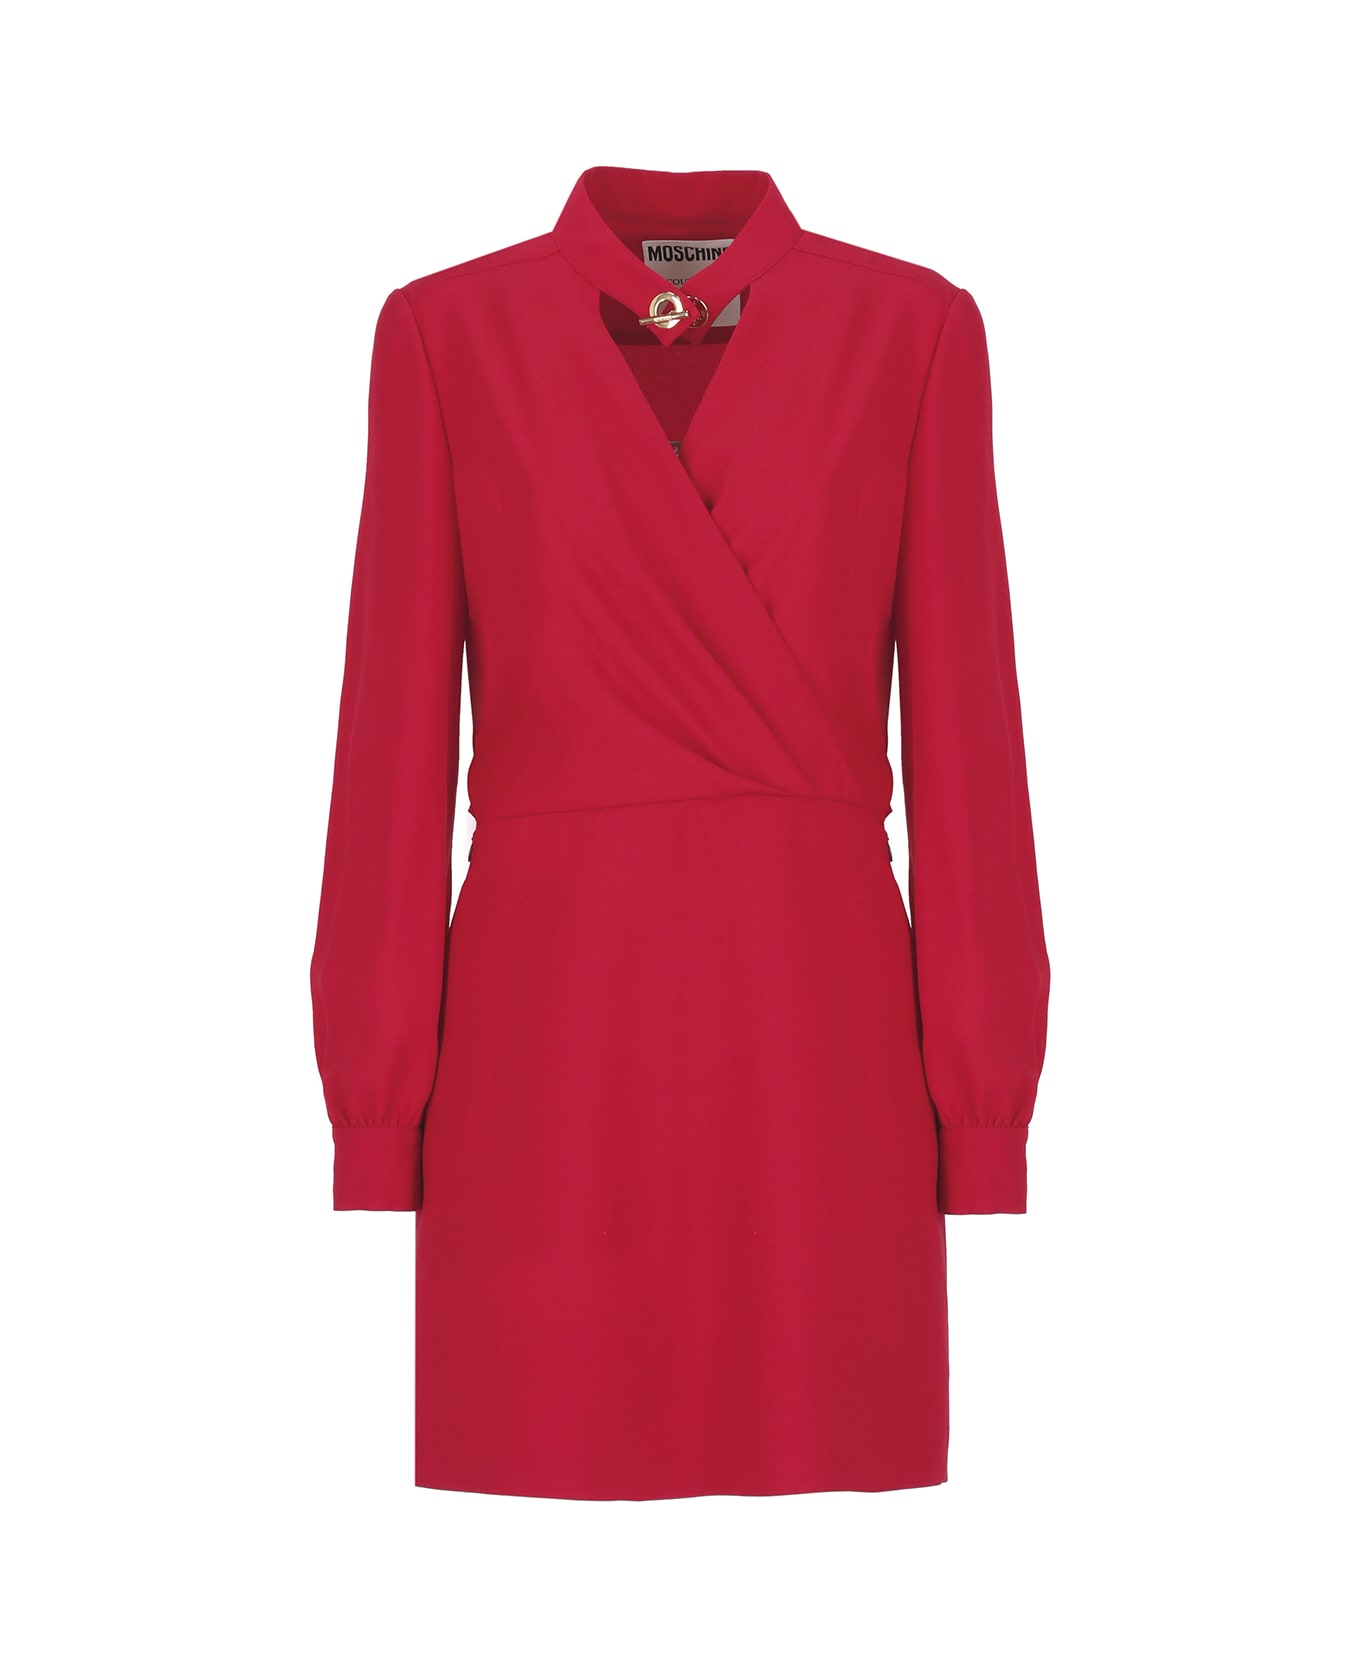 Moschino Dress With Hook - Red